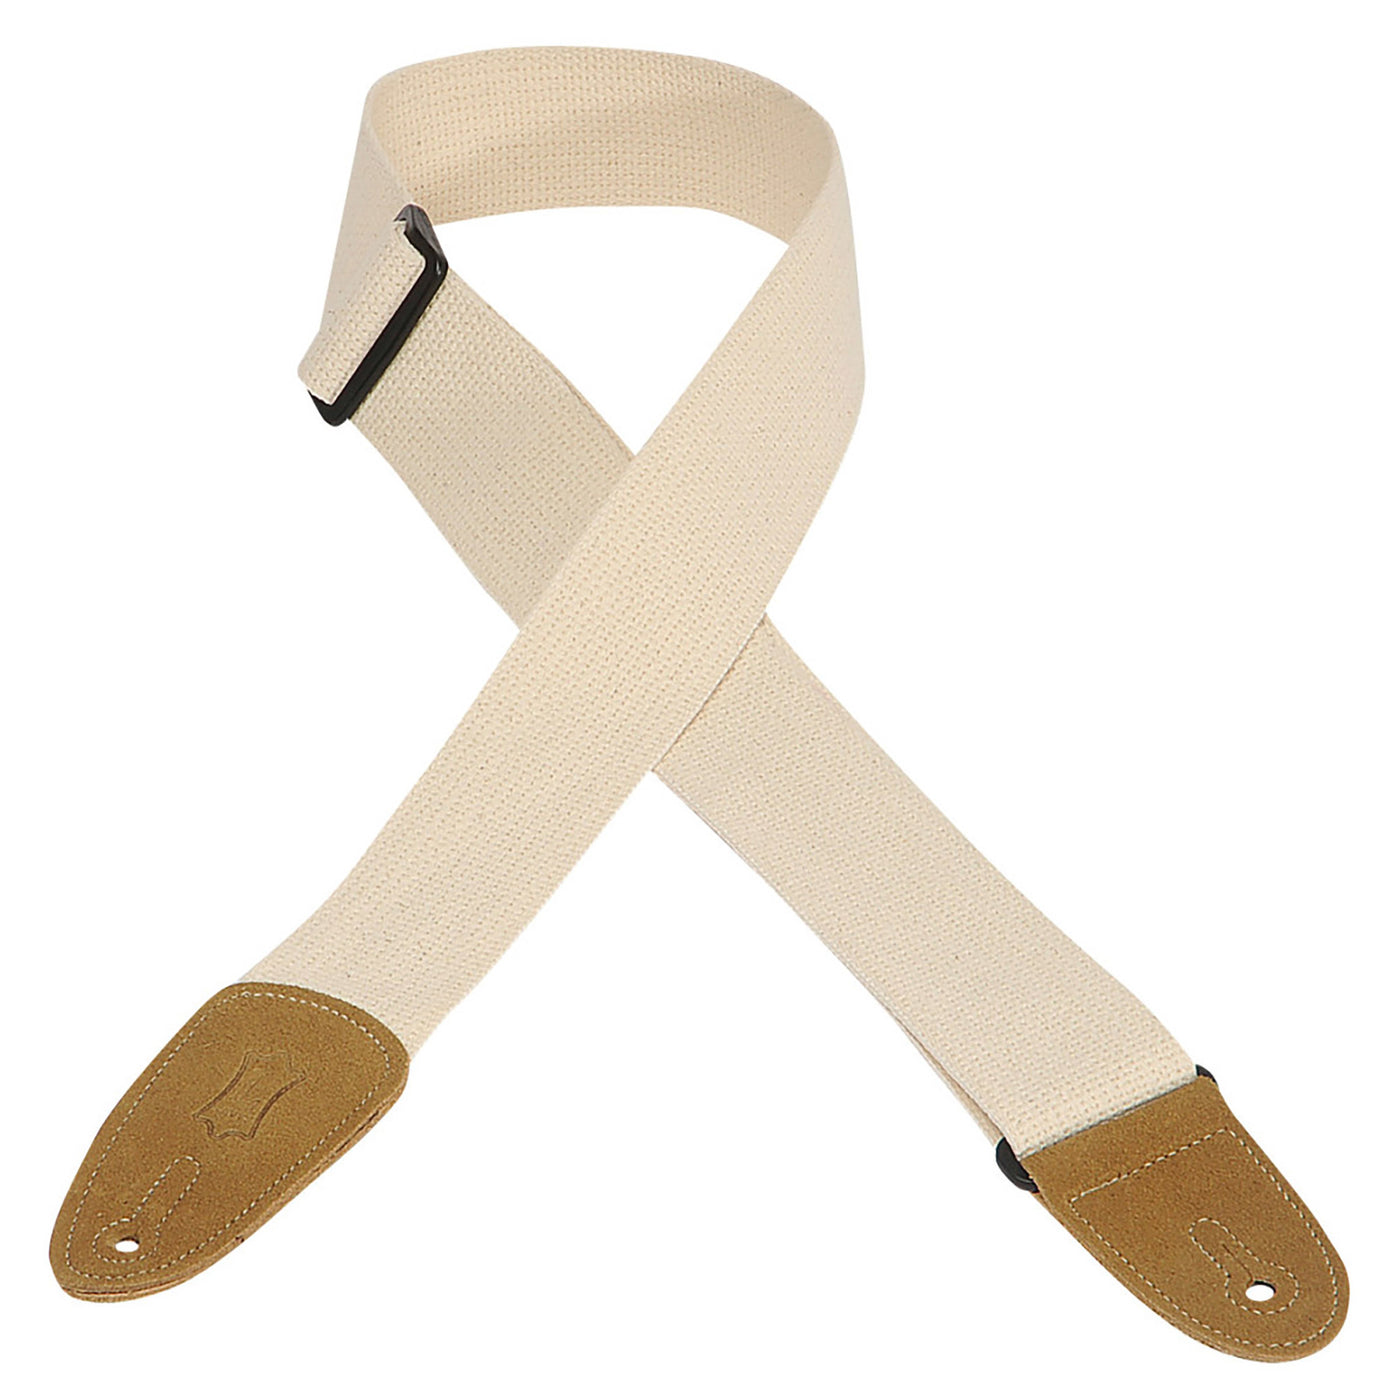 Levy's 2" Cotton Strap in Natural